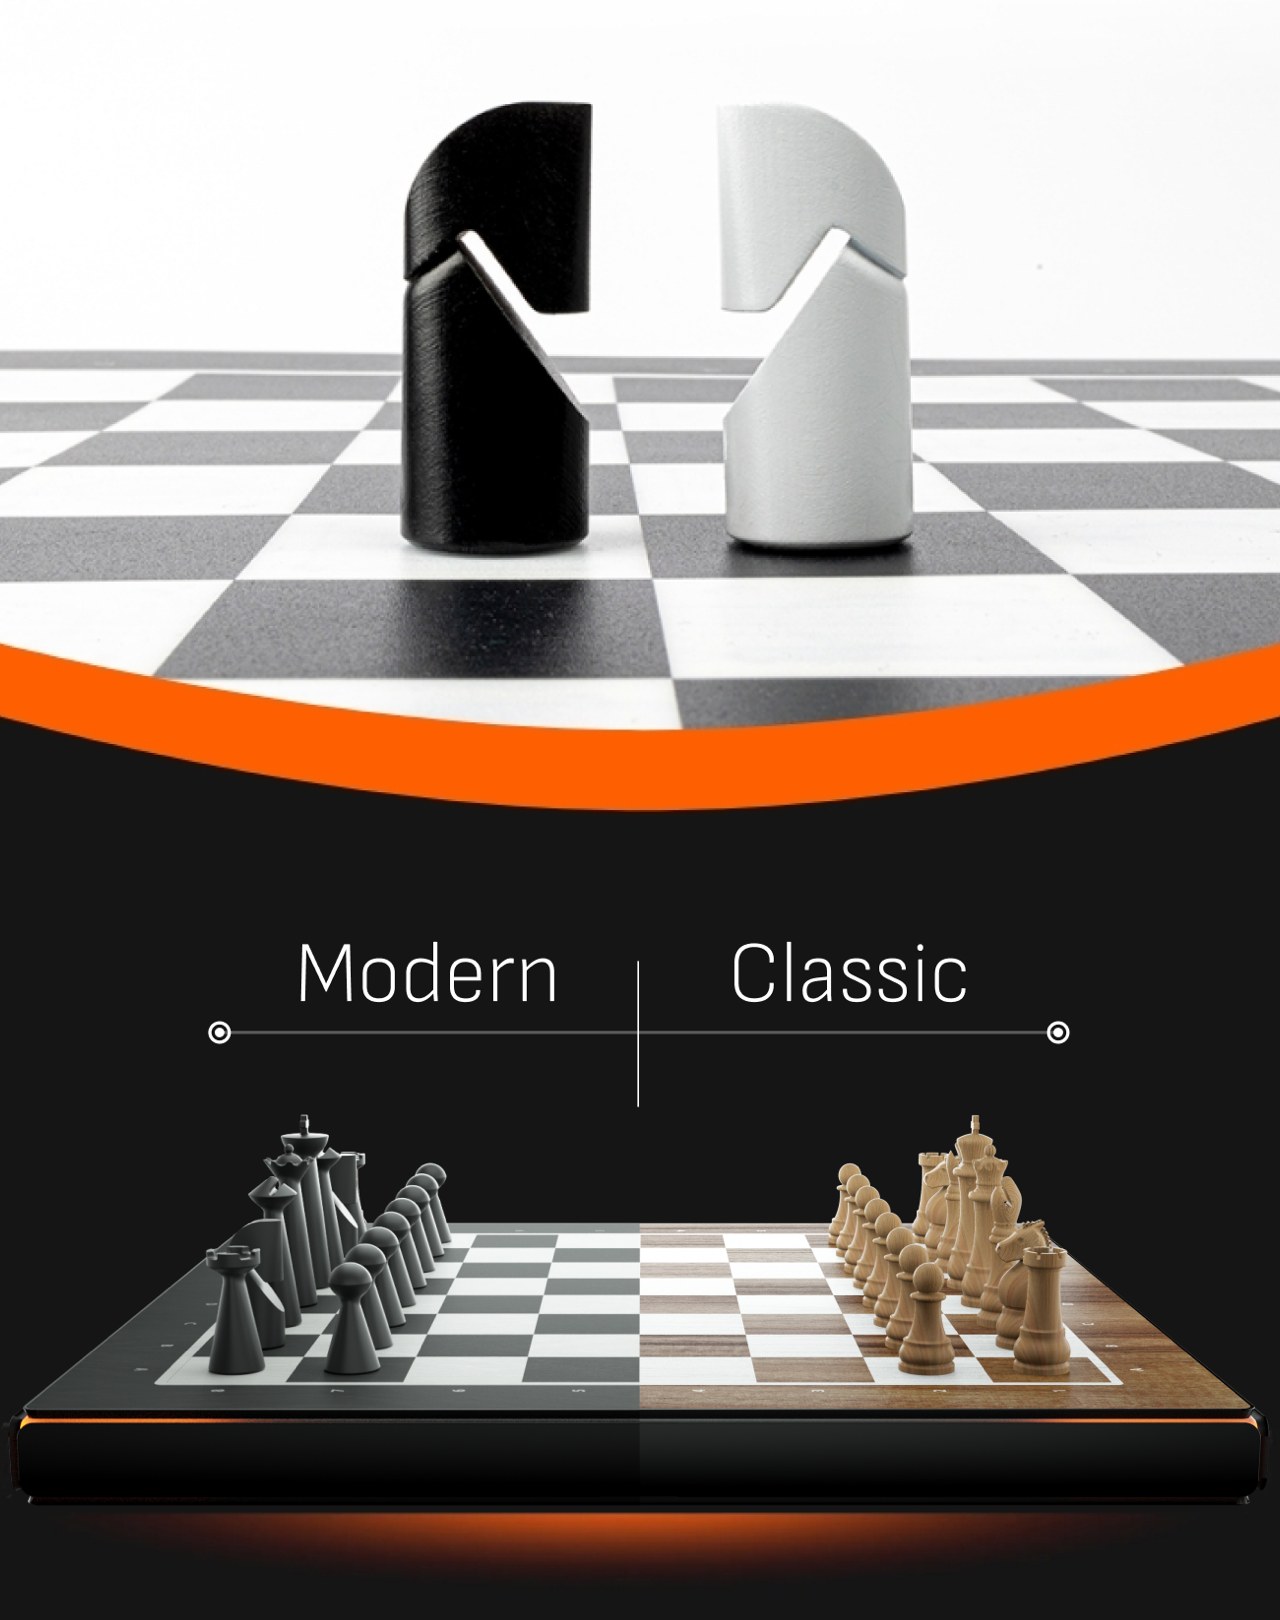 How AI-powered Chess Boards are changing the way you play Chess